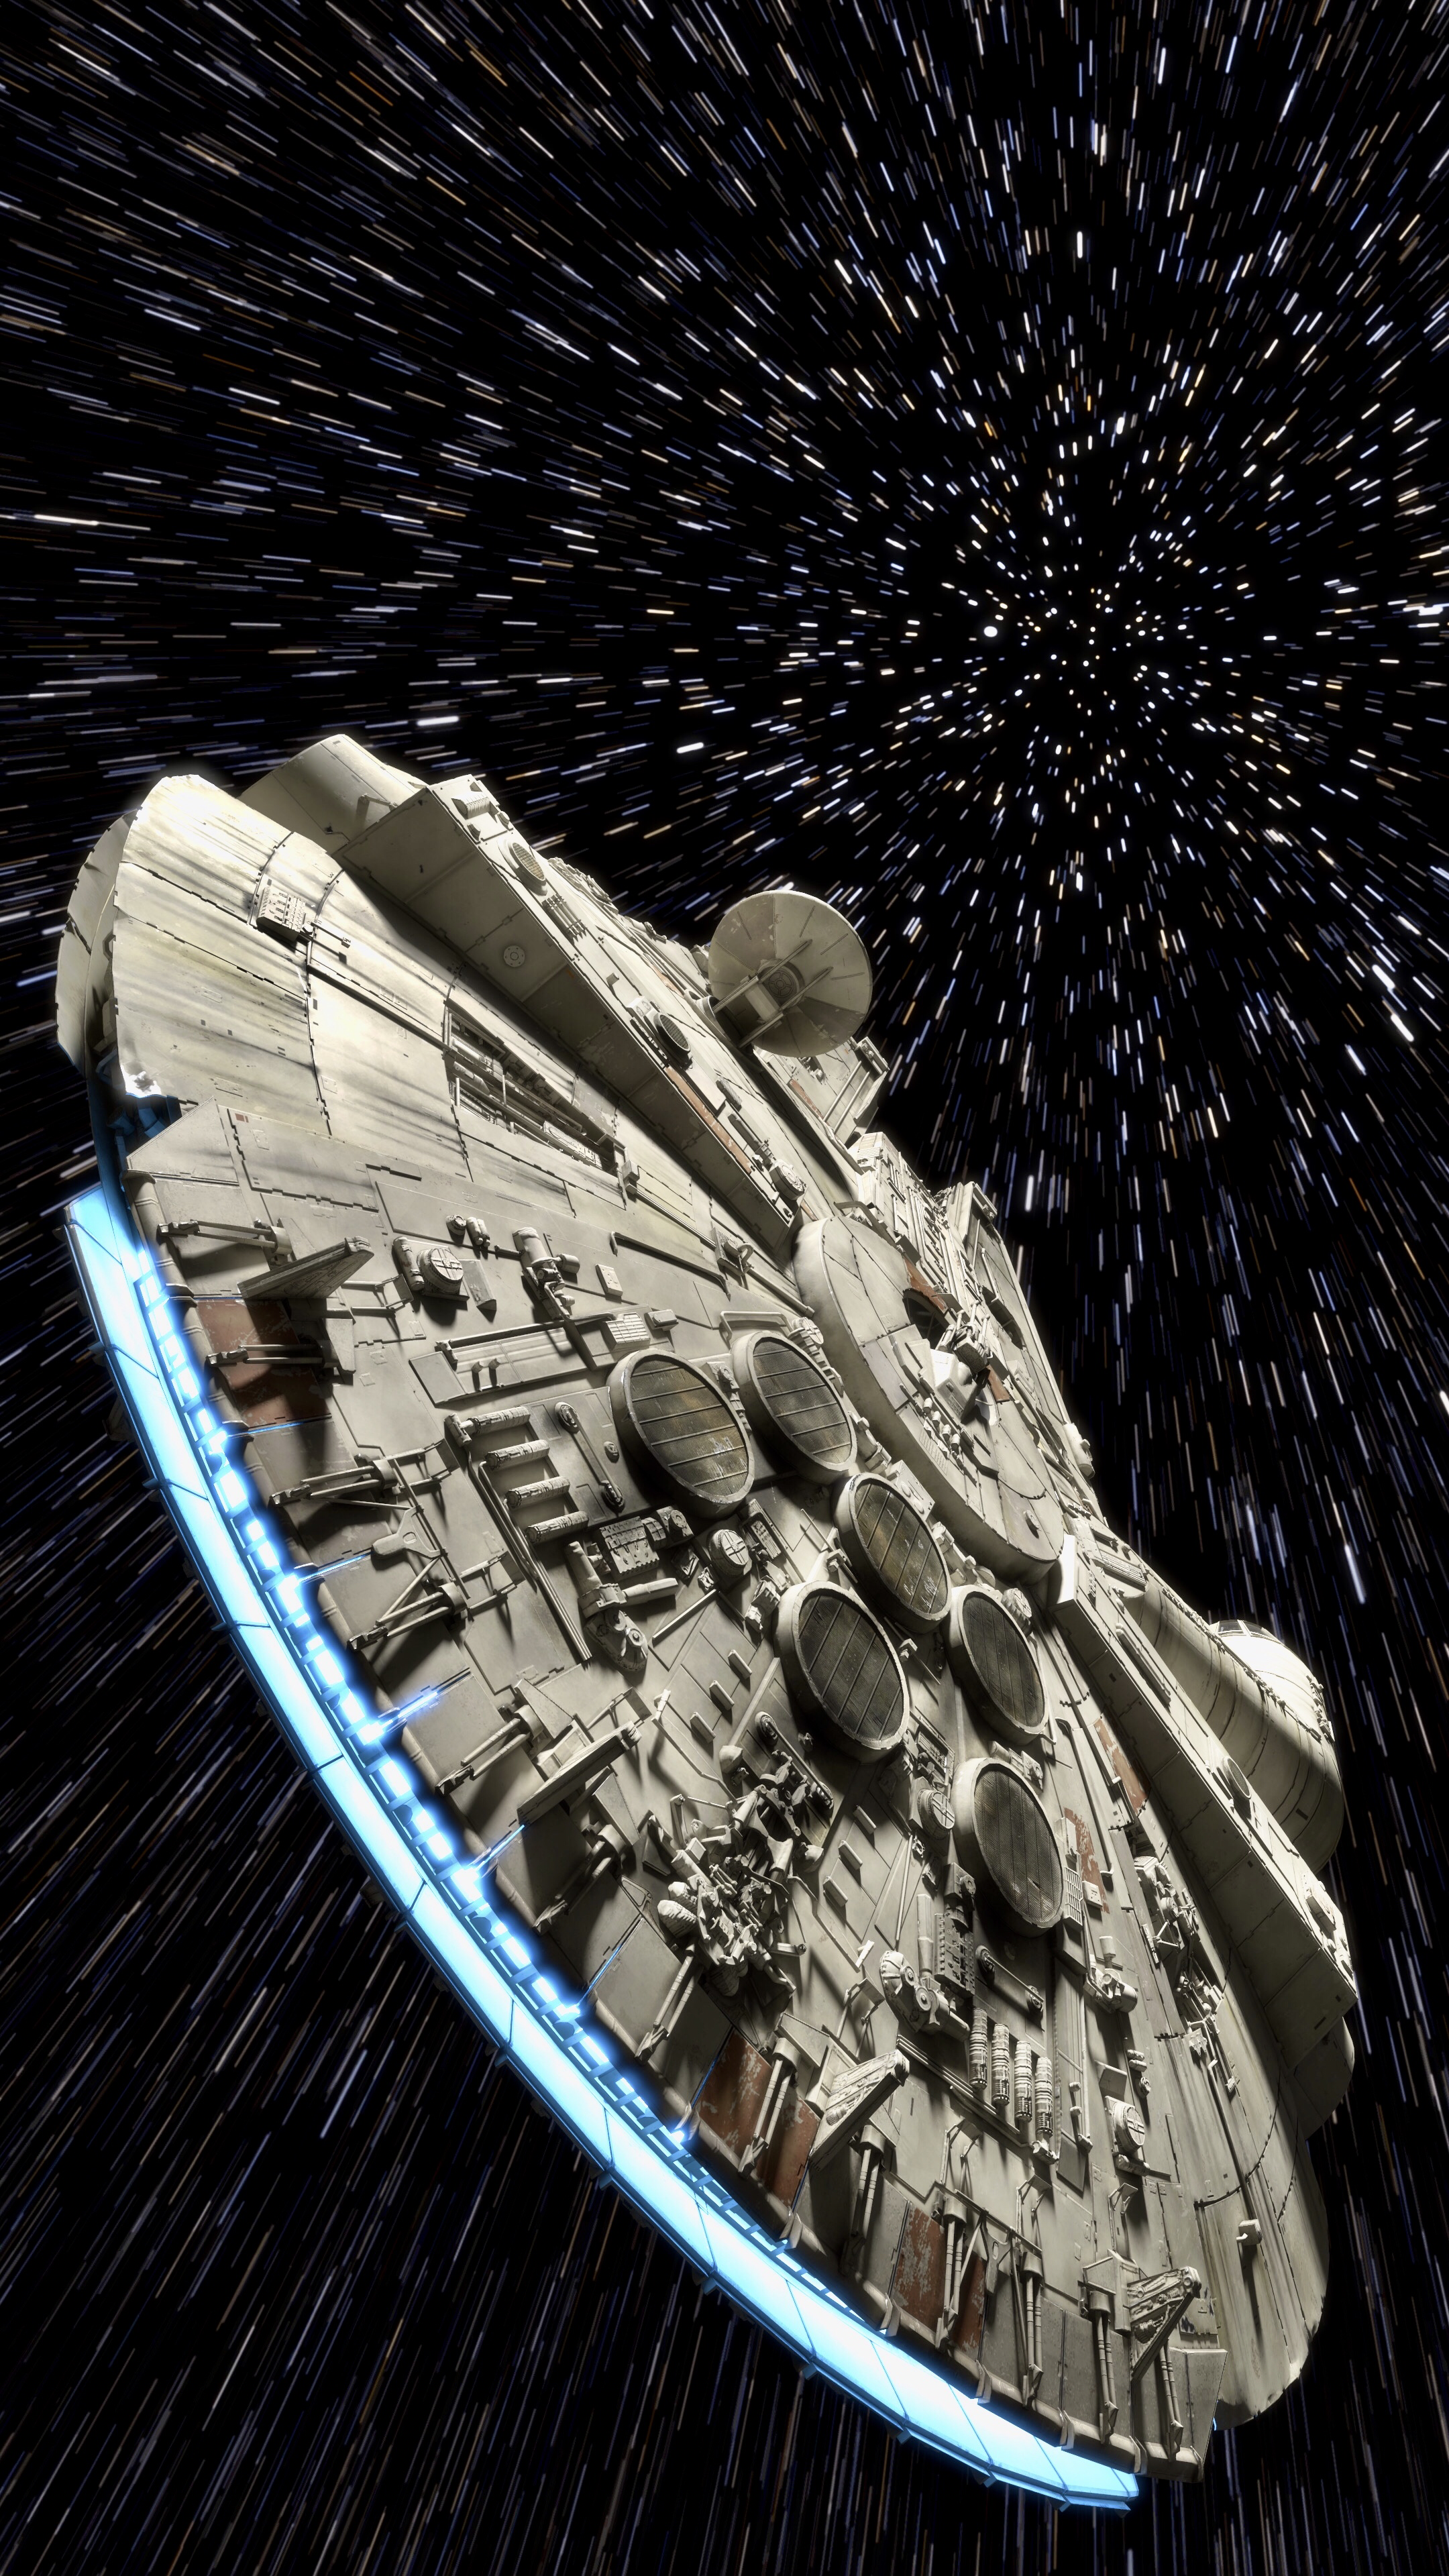 Millennium Falcon 4K Mobile Wallpaper. (Not mine but thought you guys would like it)